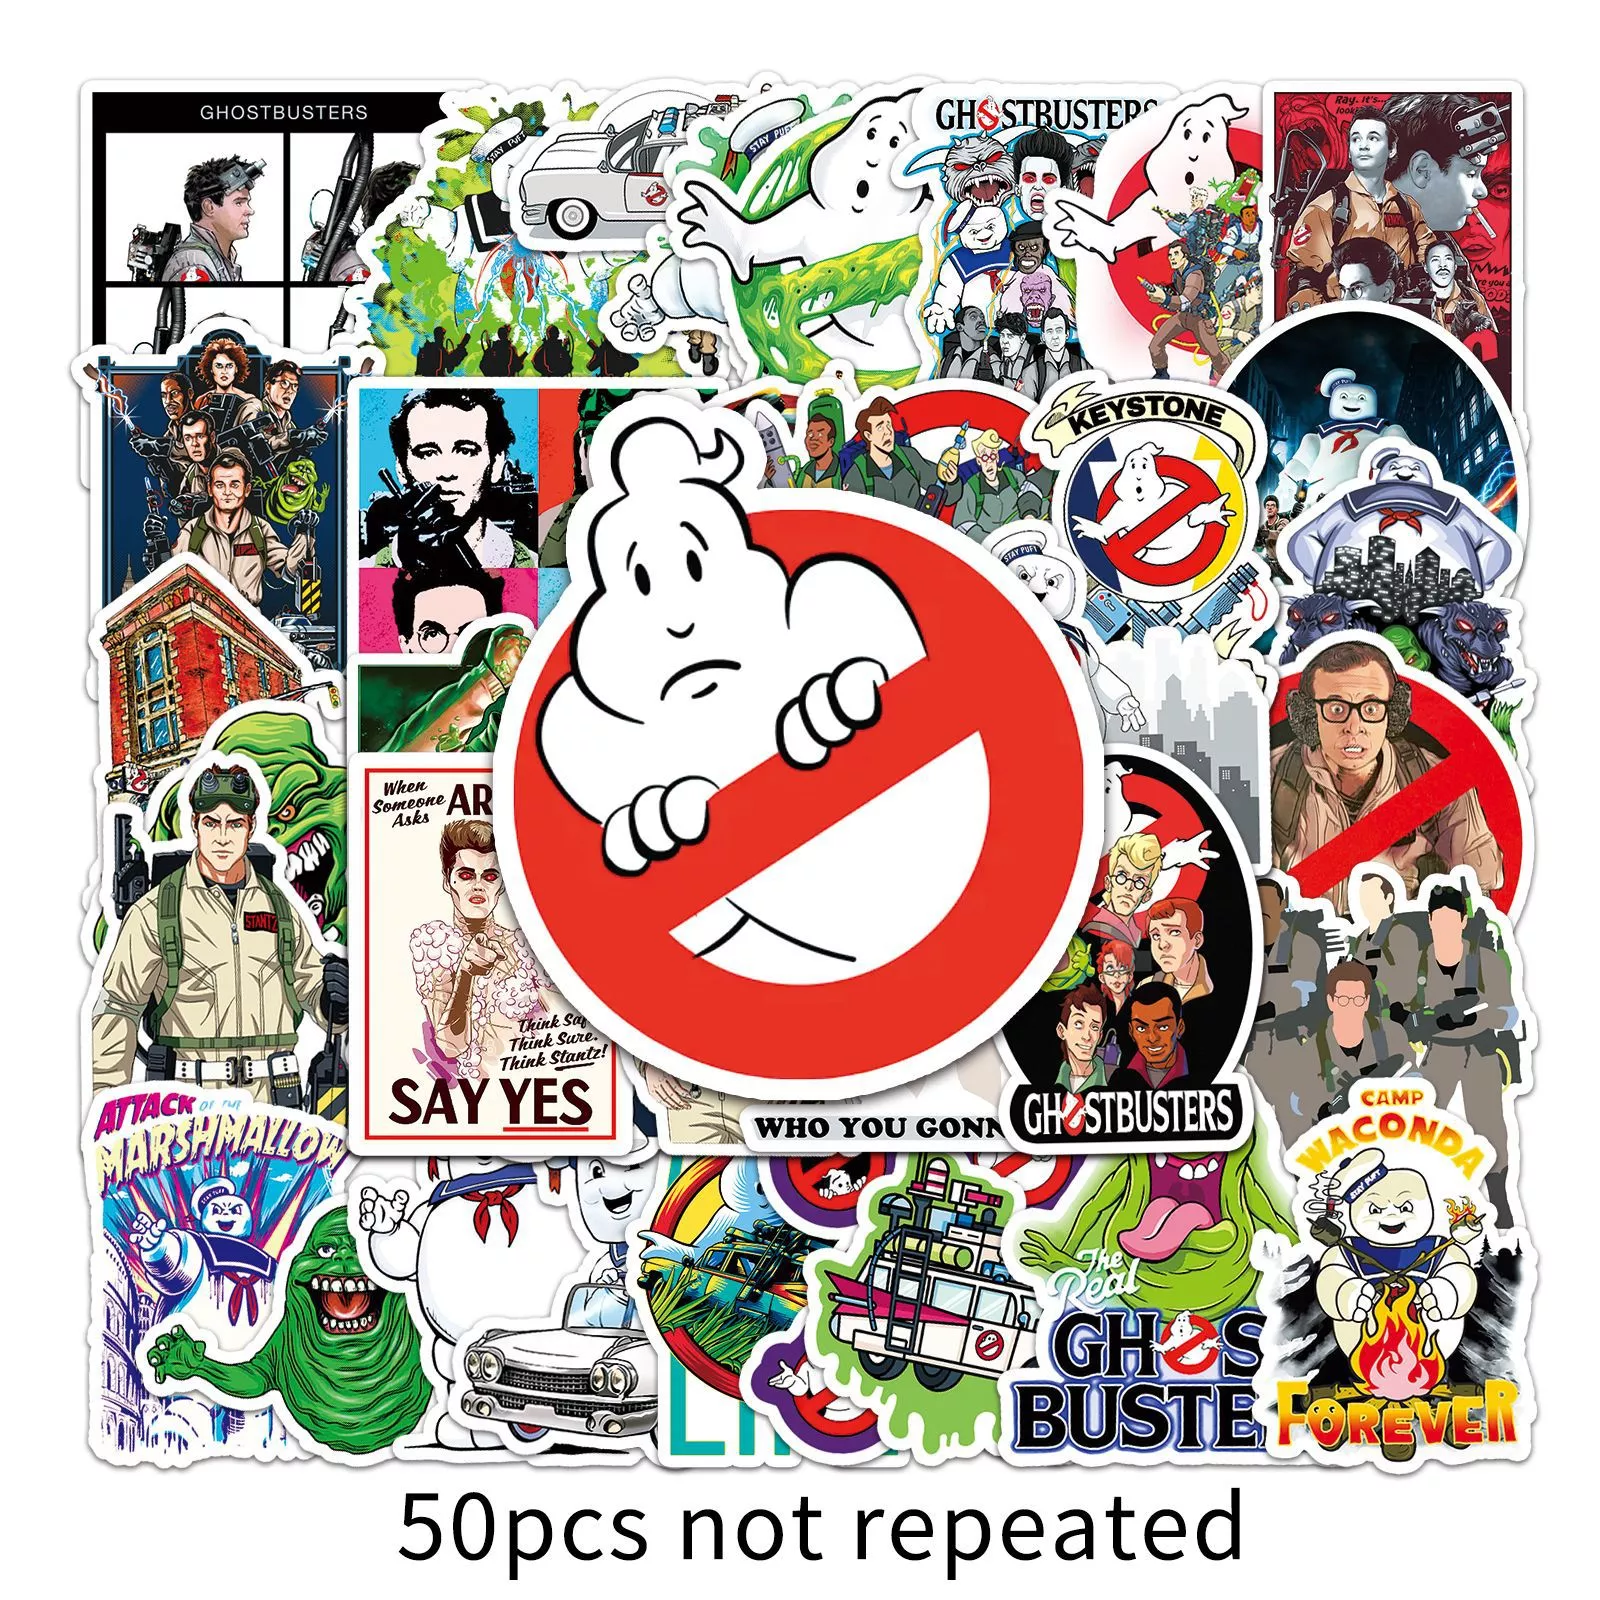 10/30/50pcs  Ghostbuster U.s. Drama Stickers Scooter Luggage Compartment Scrapbook Notebook Computer Diycar Motorcycle Stickers 10 30 50pcs inspirational ins english phrase graffiti stickers luggage motorcycle notebook waterproof stickers wholesale